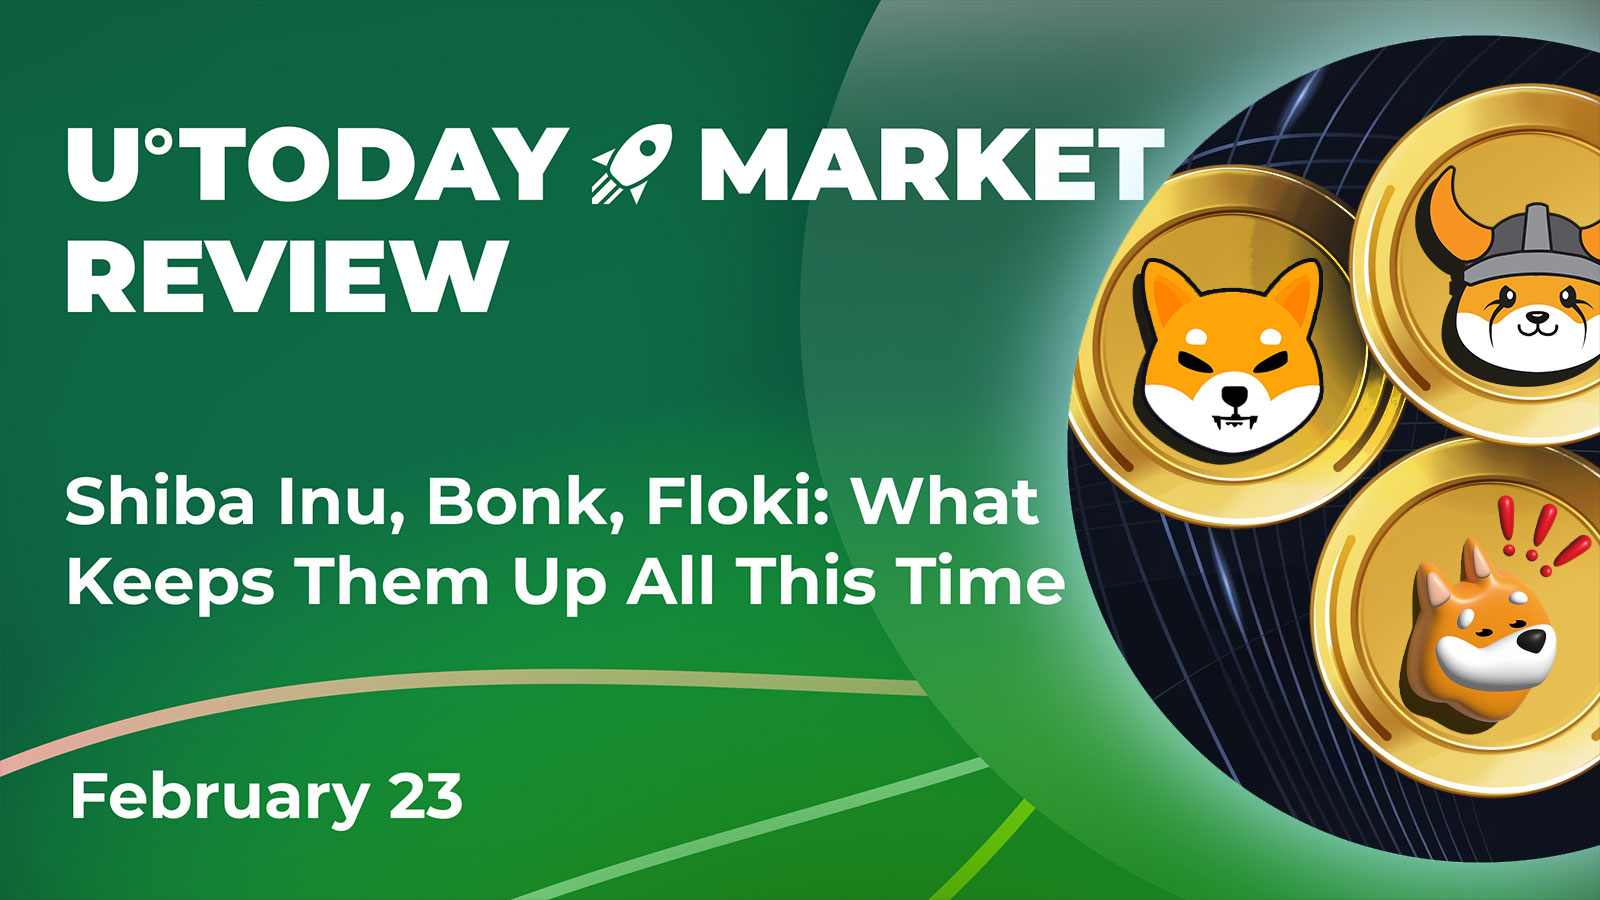 Shiba Inu, Bonk Floki and Other Doggy-Themed Assets: What Keeps Them up All This Time?